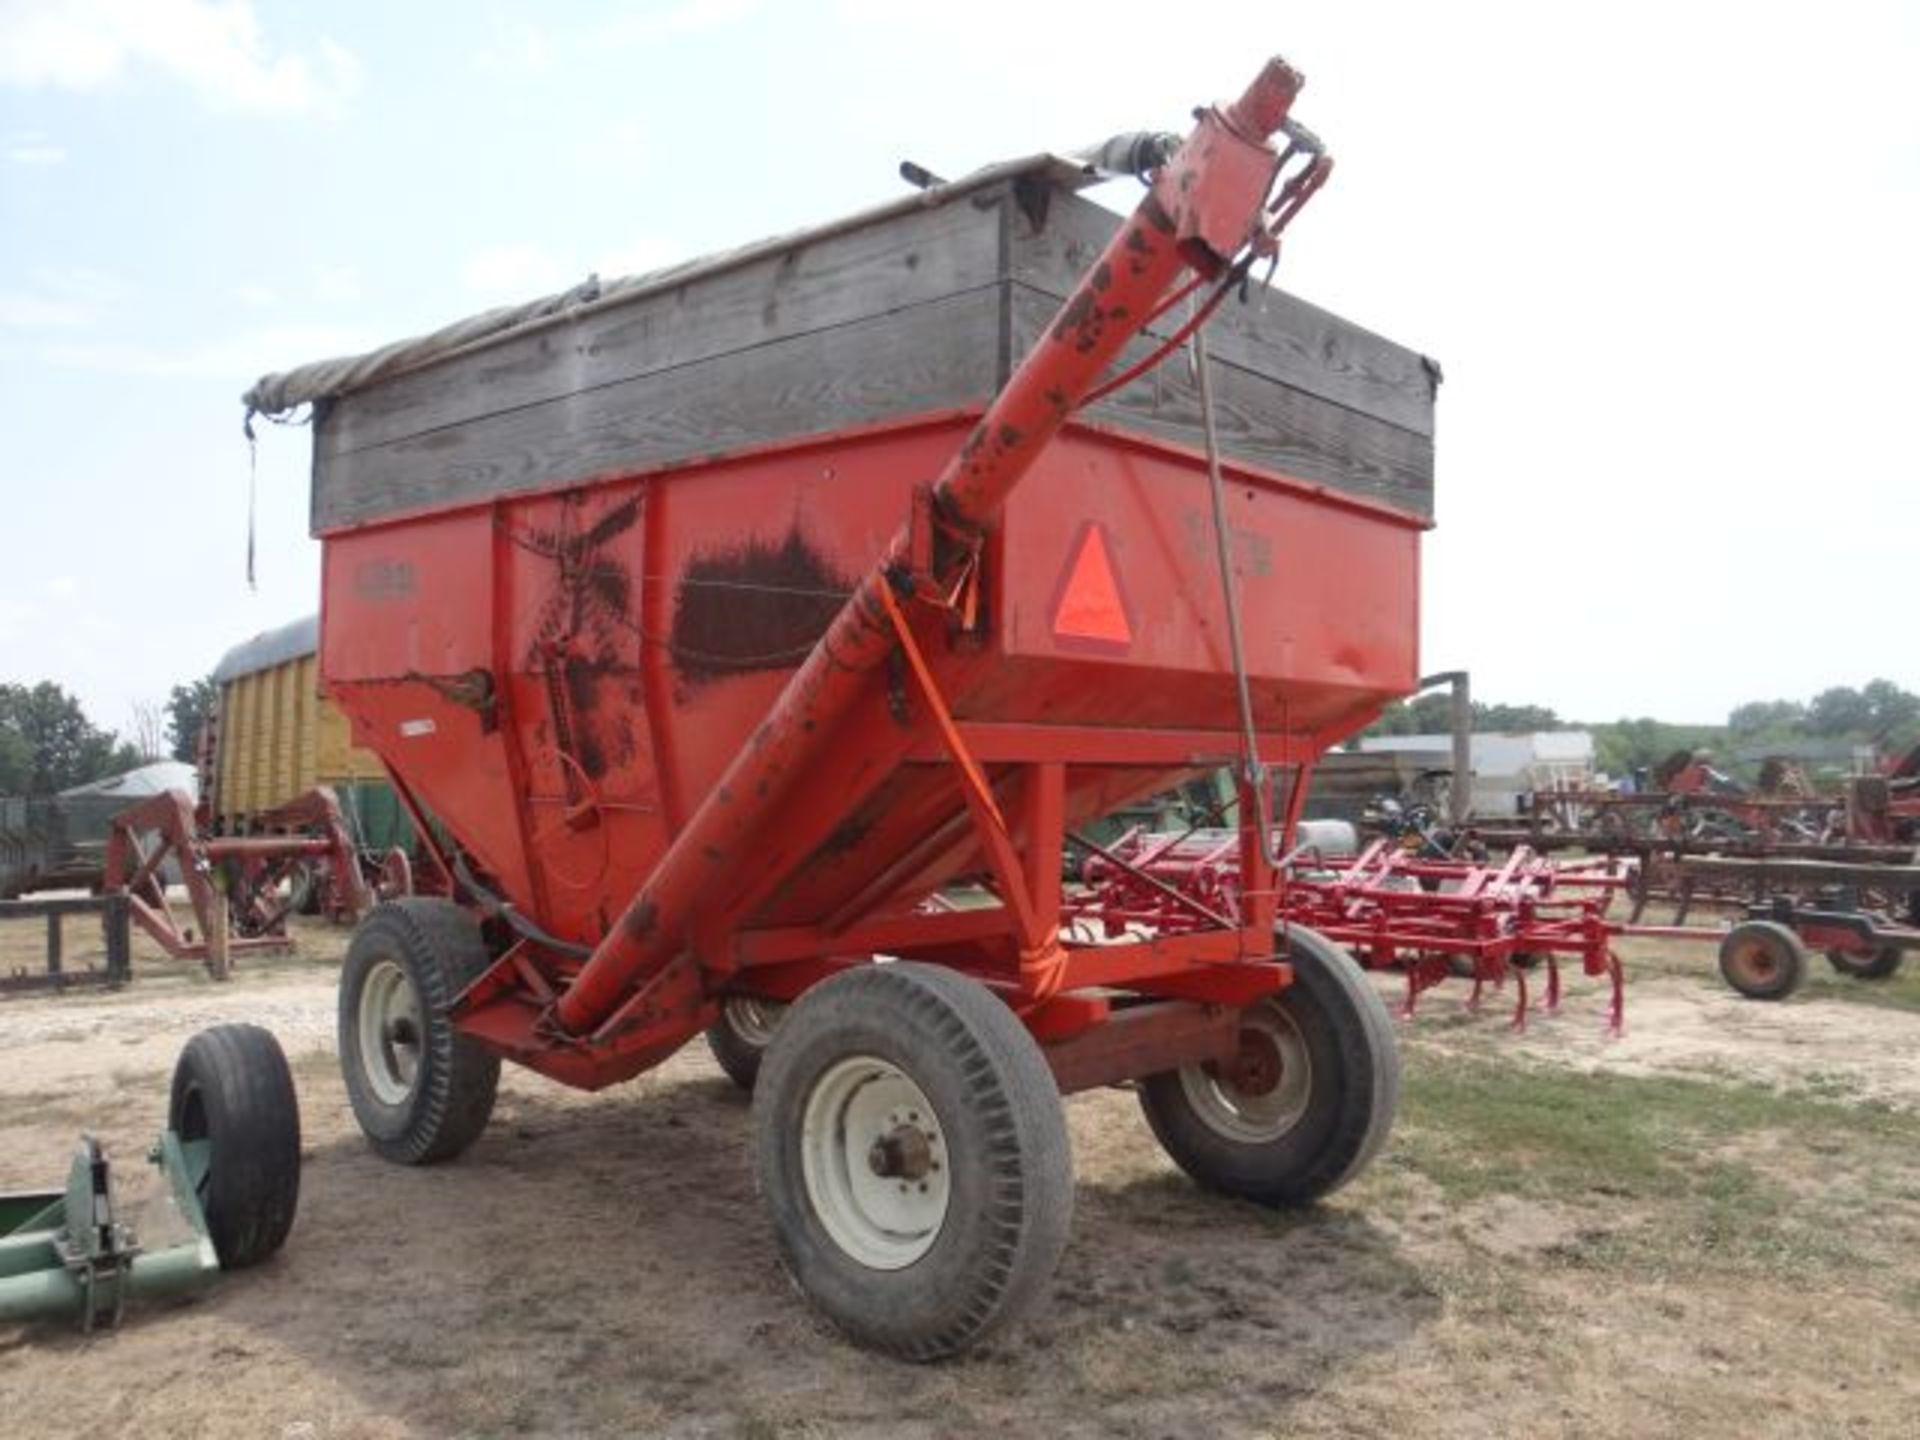 Kilbros 375 Gravity Wagon w/Seed Auger - Image 3 of 3